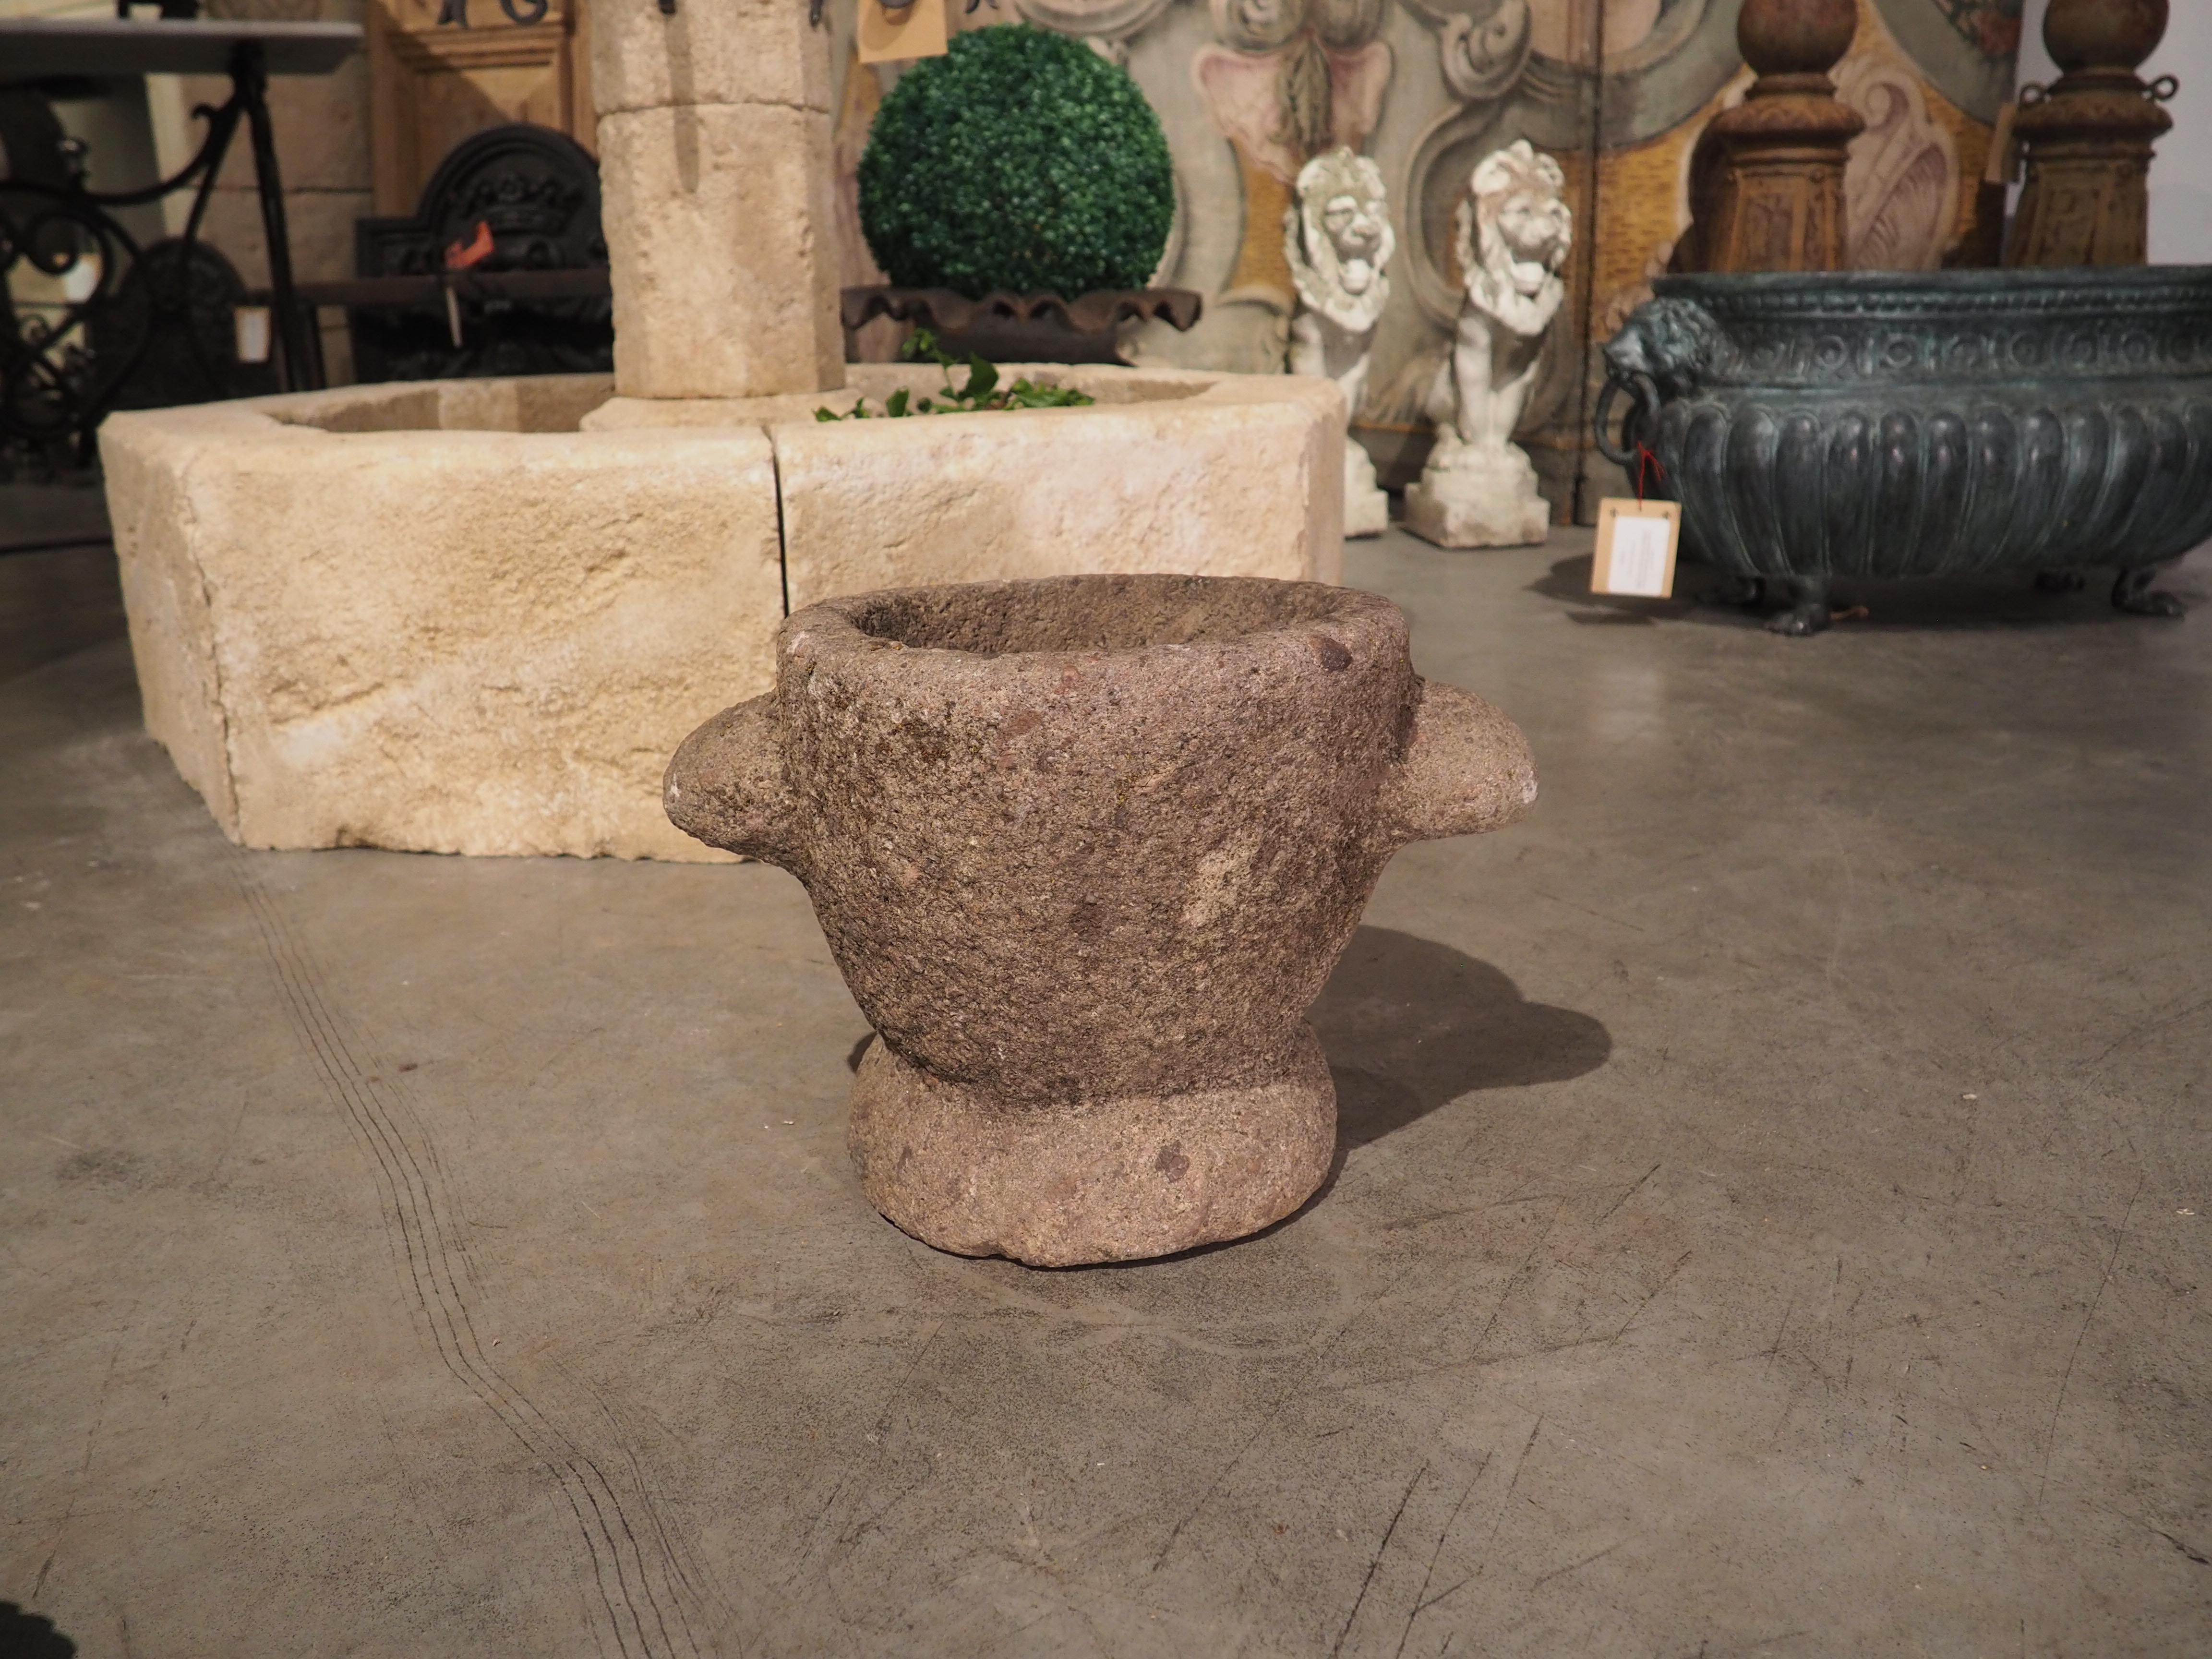 This granite rose mortar was hand-carved in Northern Brittany, France during the 1600’s. Granite is formed when magma is cooled underground, which causes various minerals to become embedded in the stone. Our gray granite has black and gray